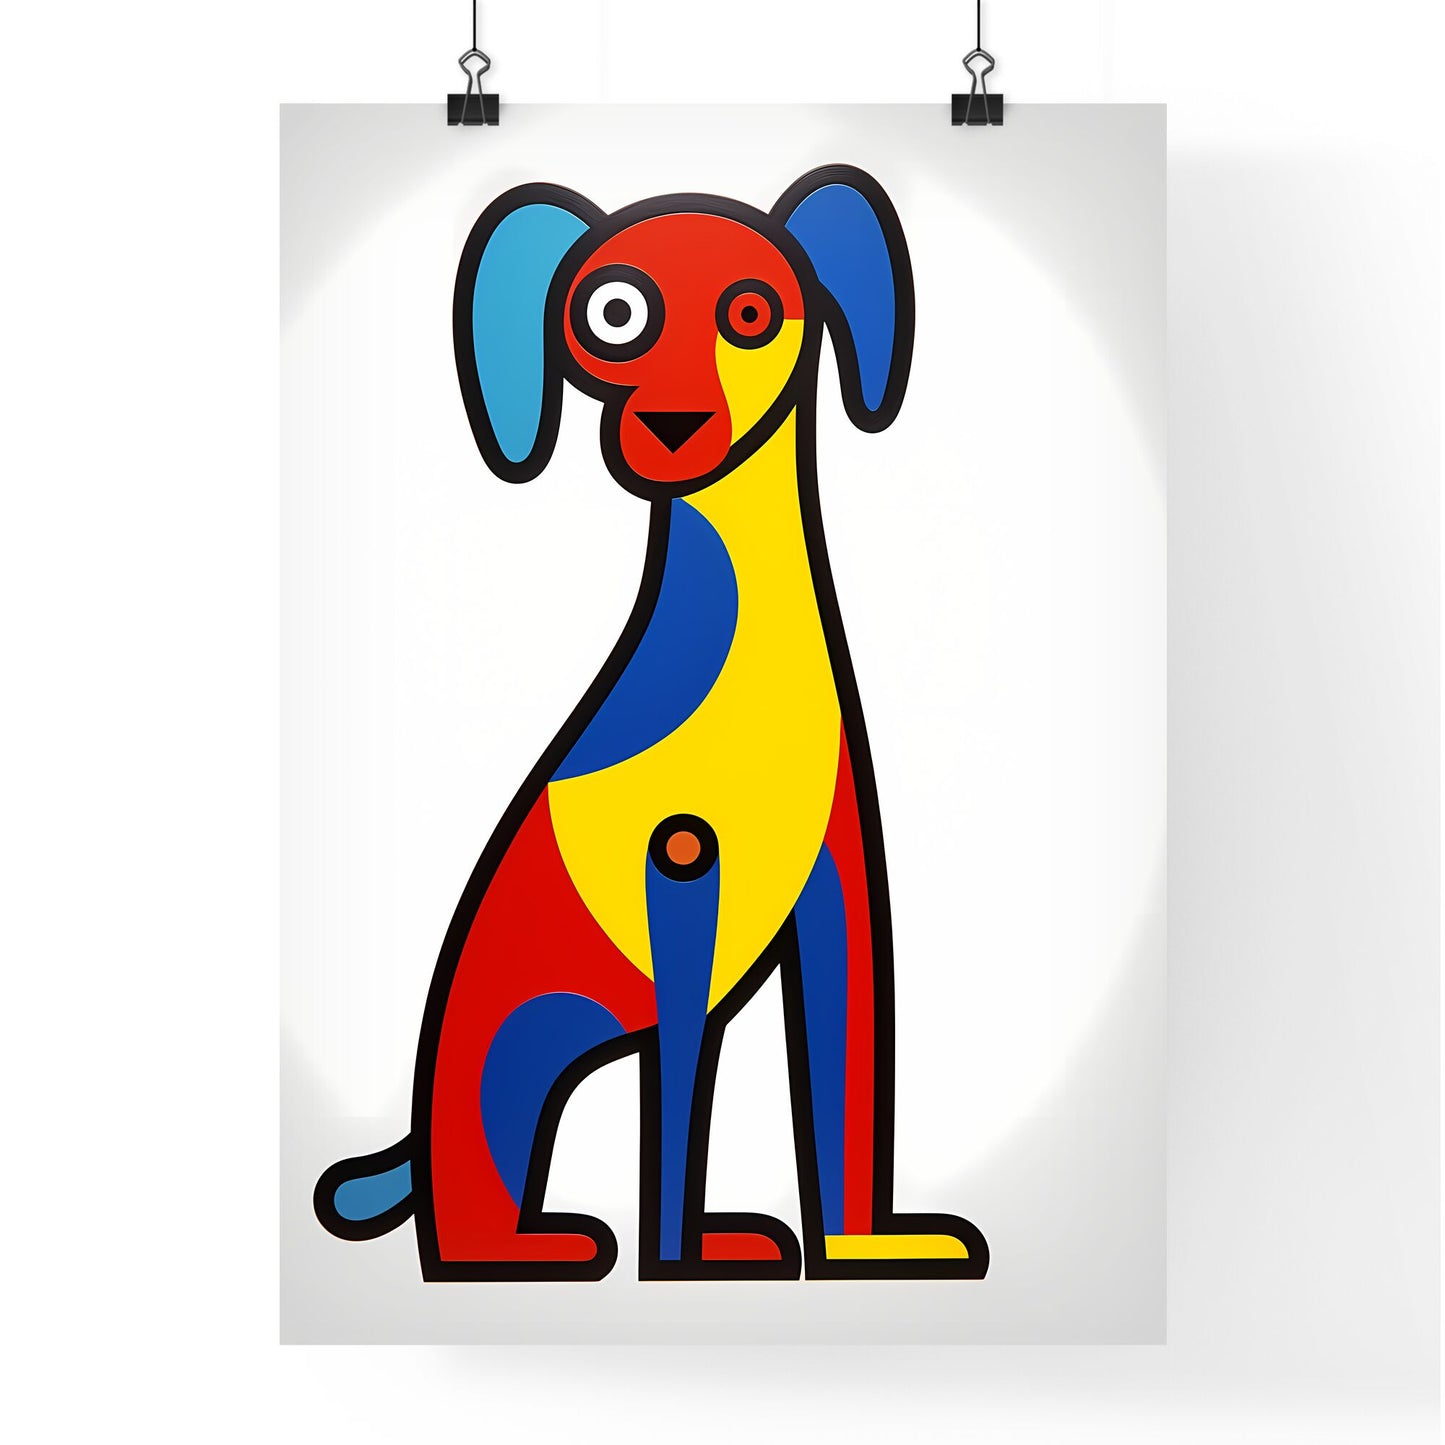 A Poster of minimalist dog art - A Colorful Dog With Blue And Red Ears Default Title